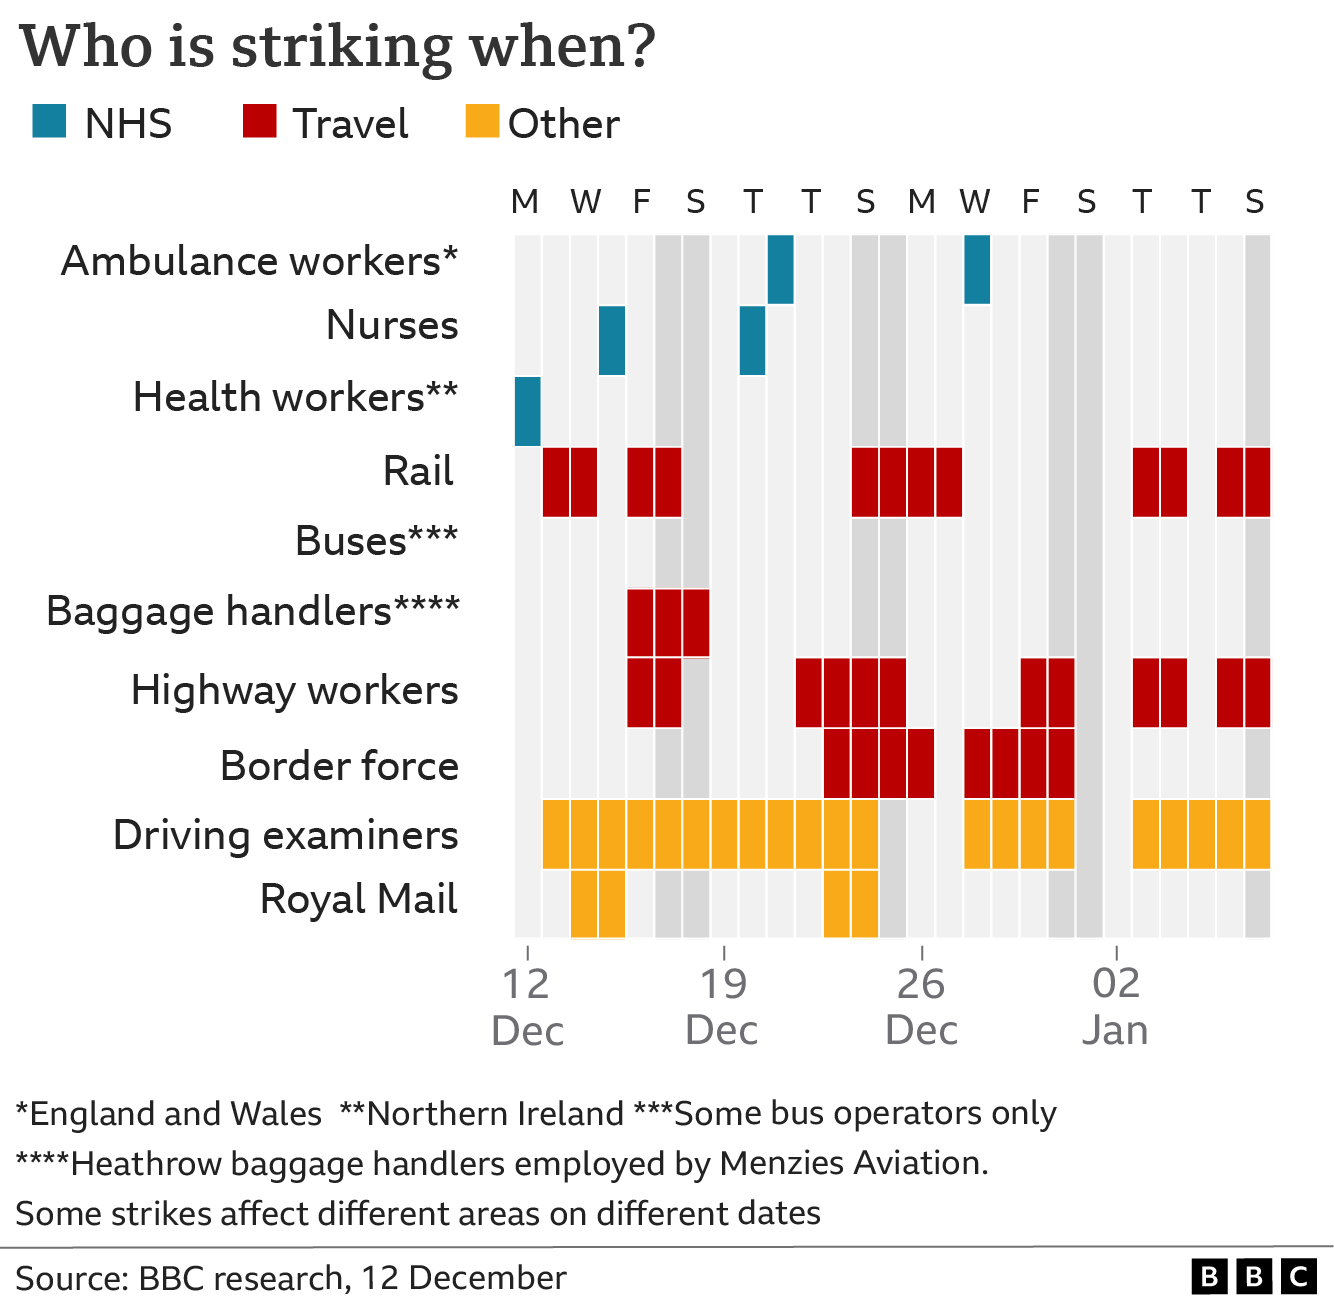 Graphic showing who is striking when 12/12